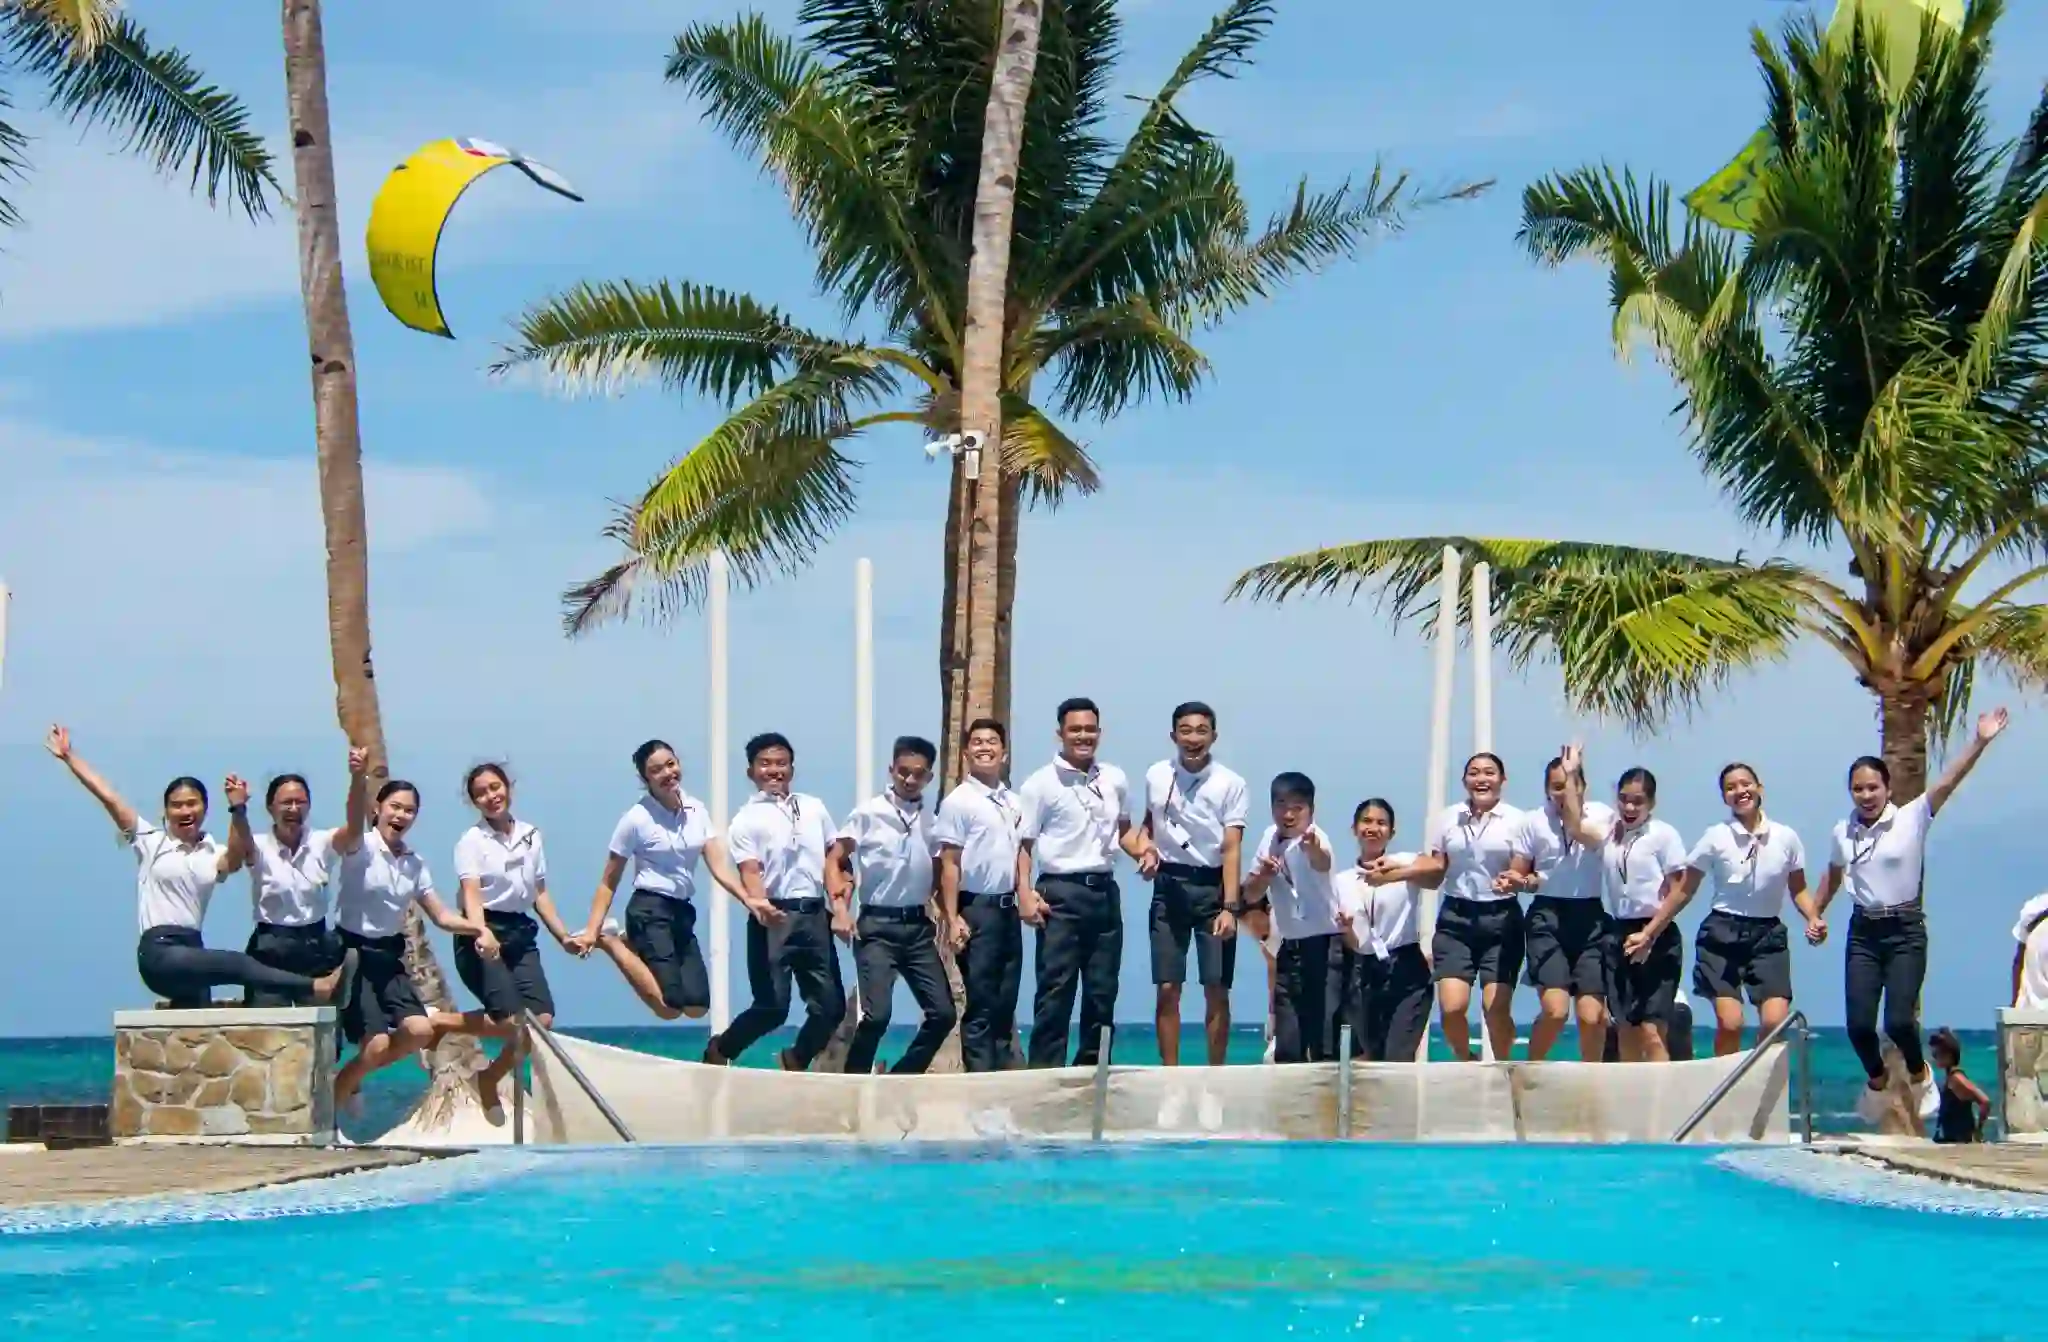 OJT students poses for a picture with the beach and coconut trees behind